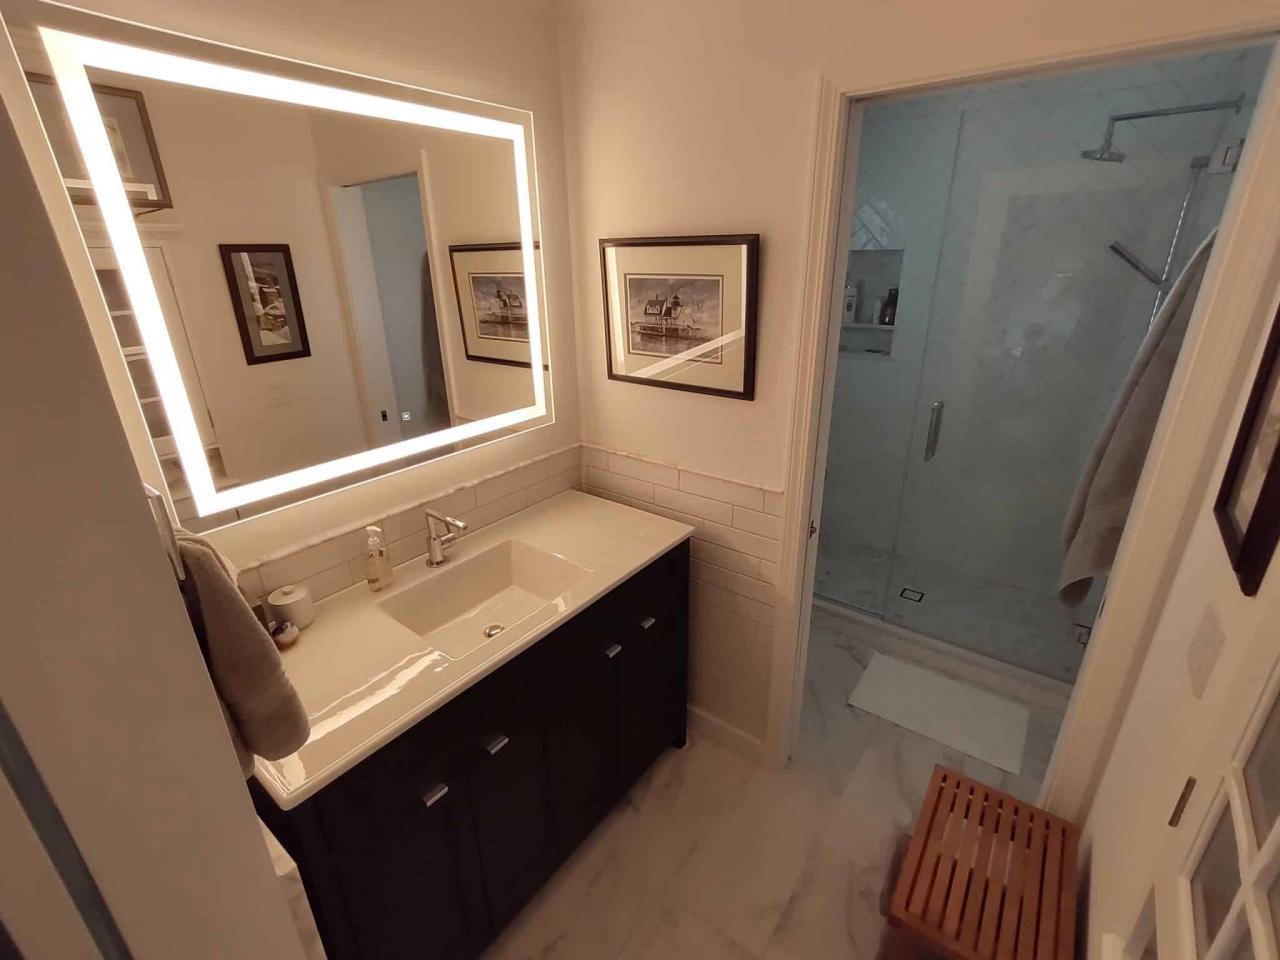 Bathroom Remodeling in Naperville and Aurora